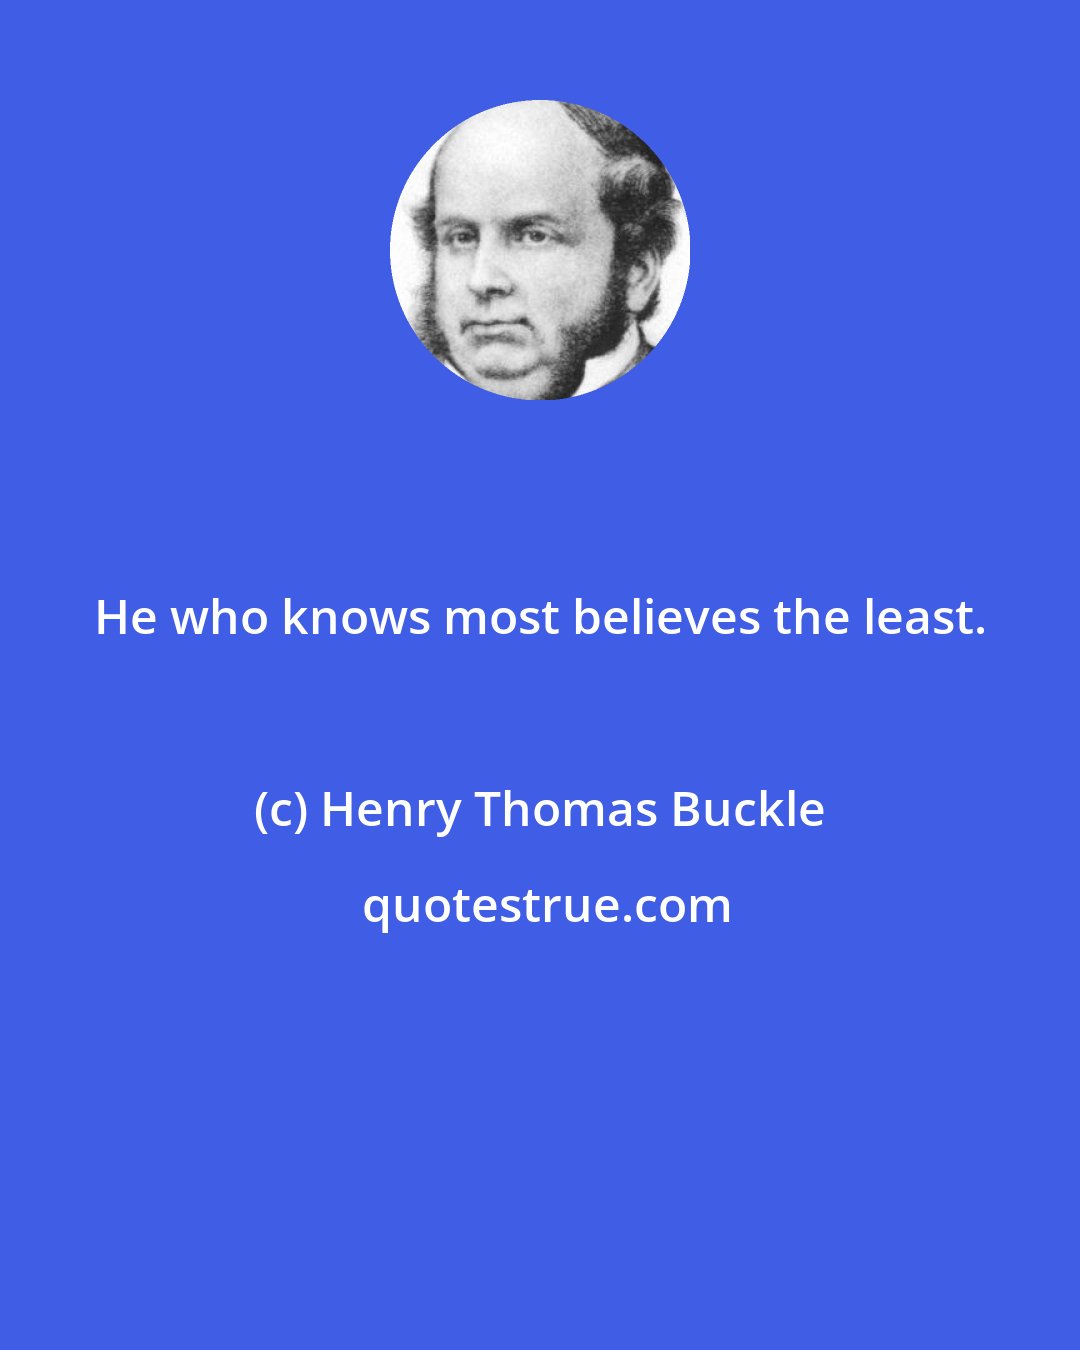 Henry Thomas Buckle: He who knows most believes the least.